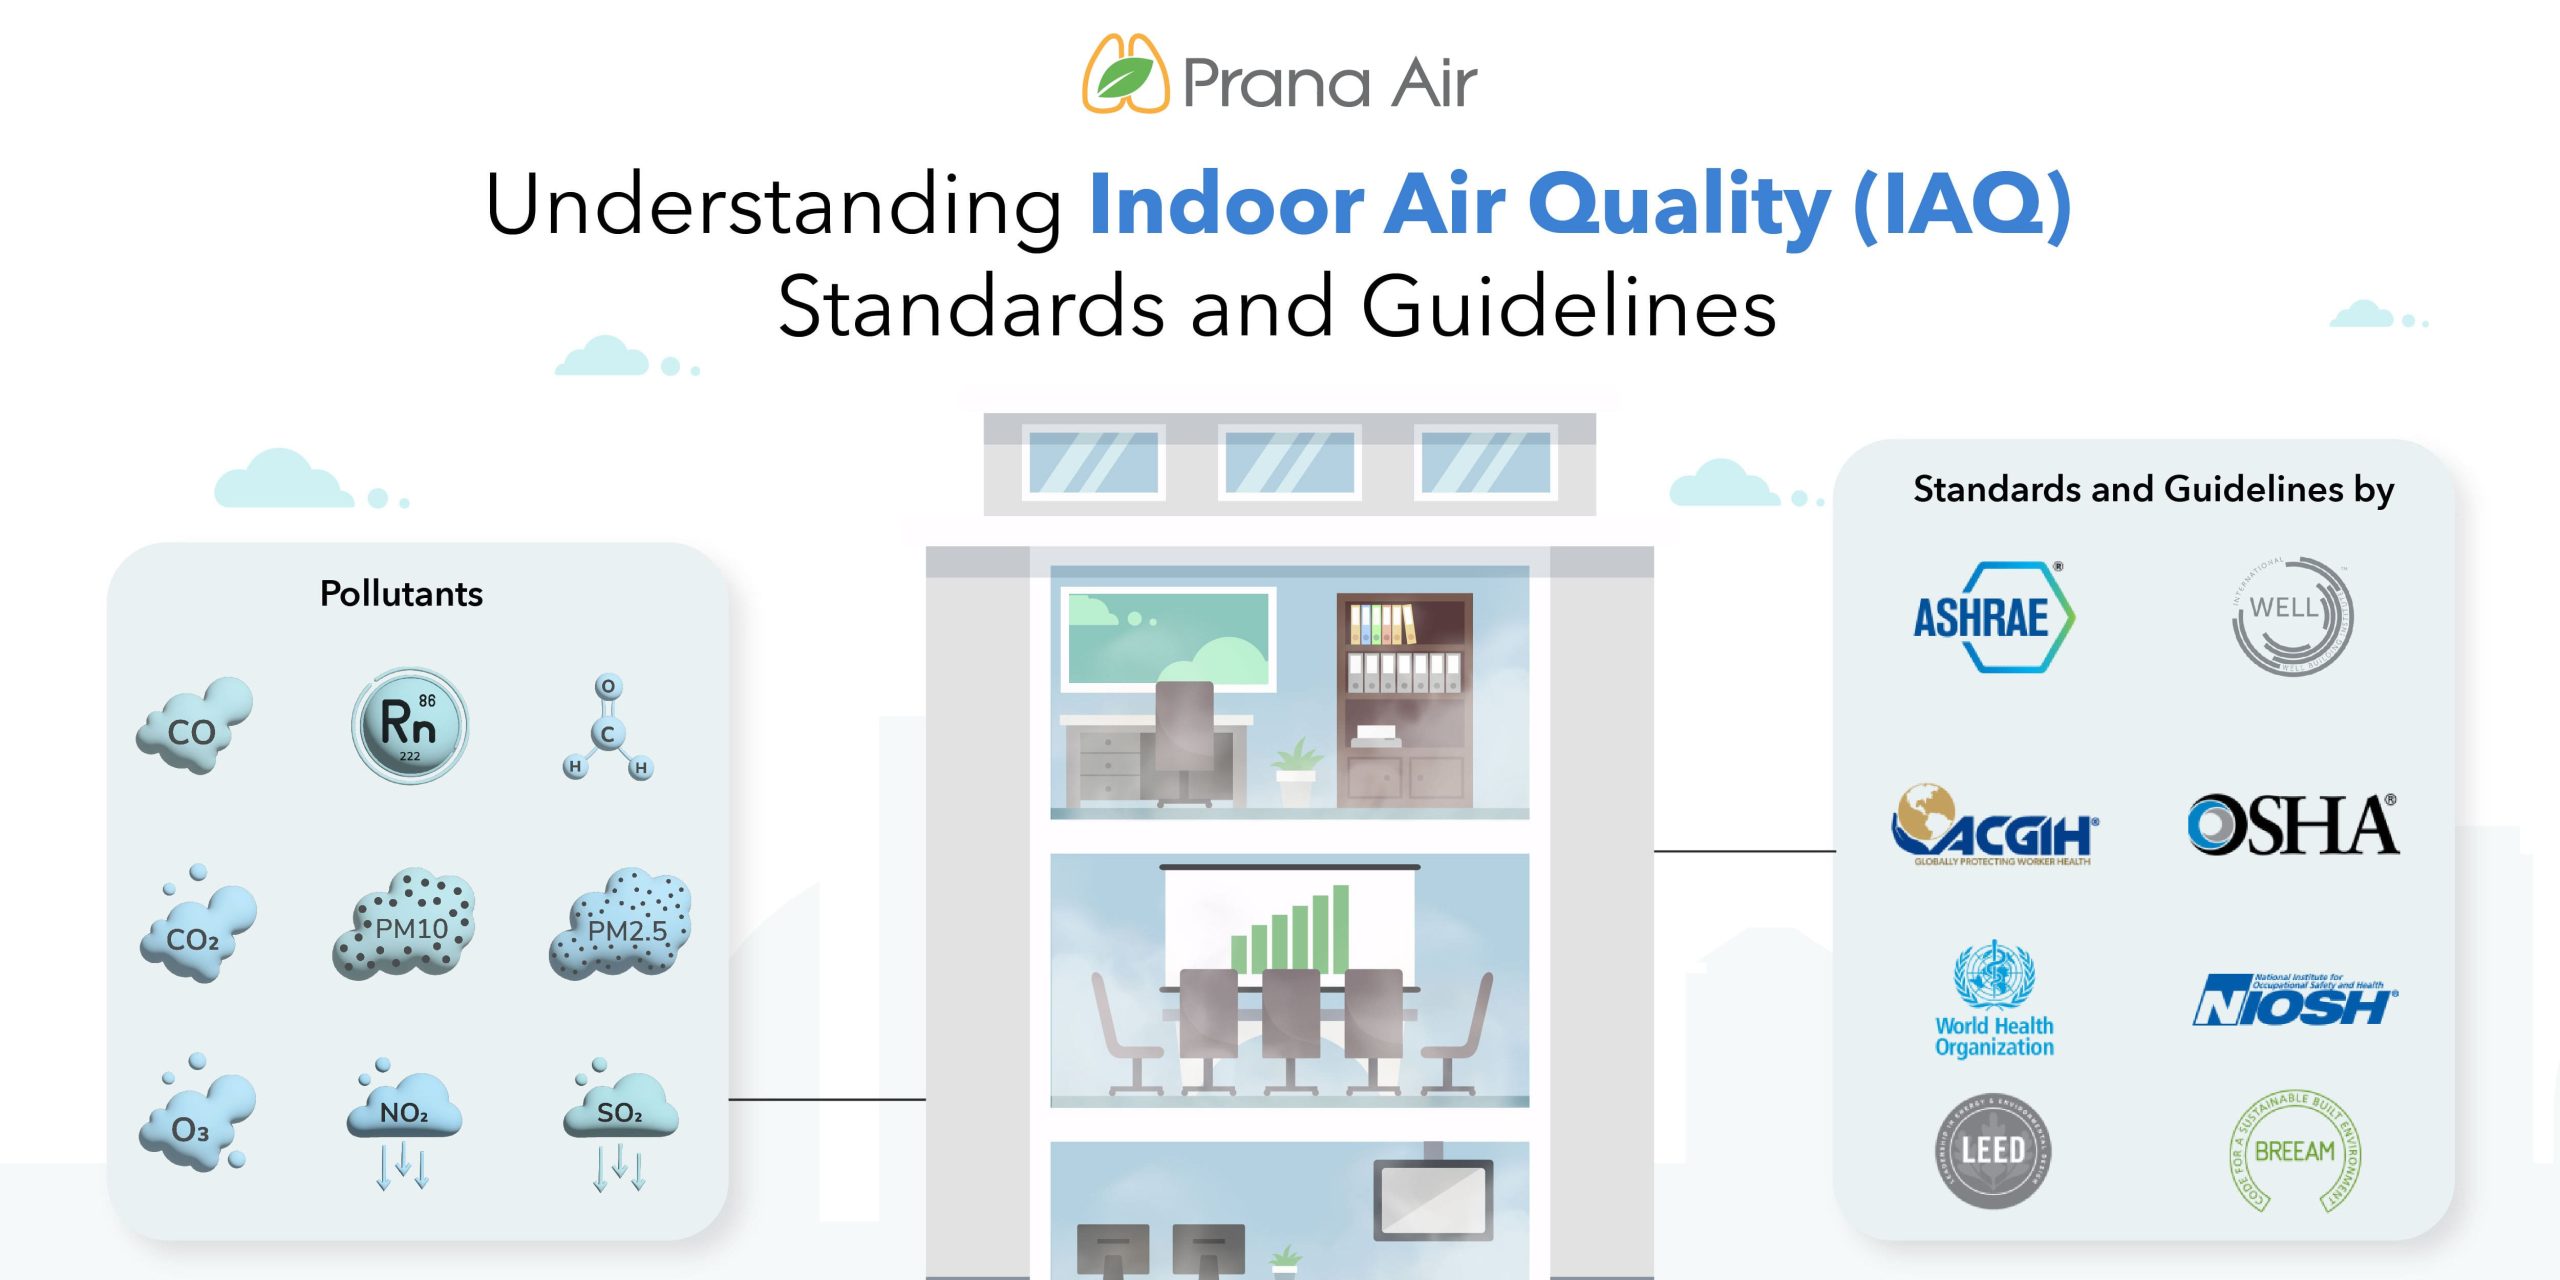 IAQ standards and guidelines